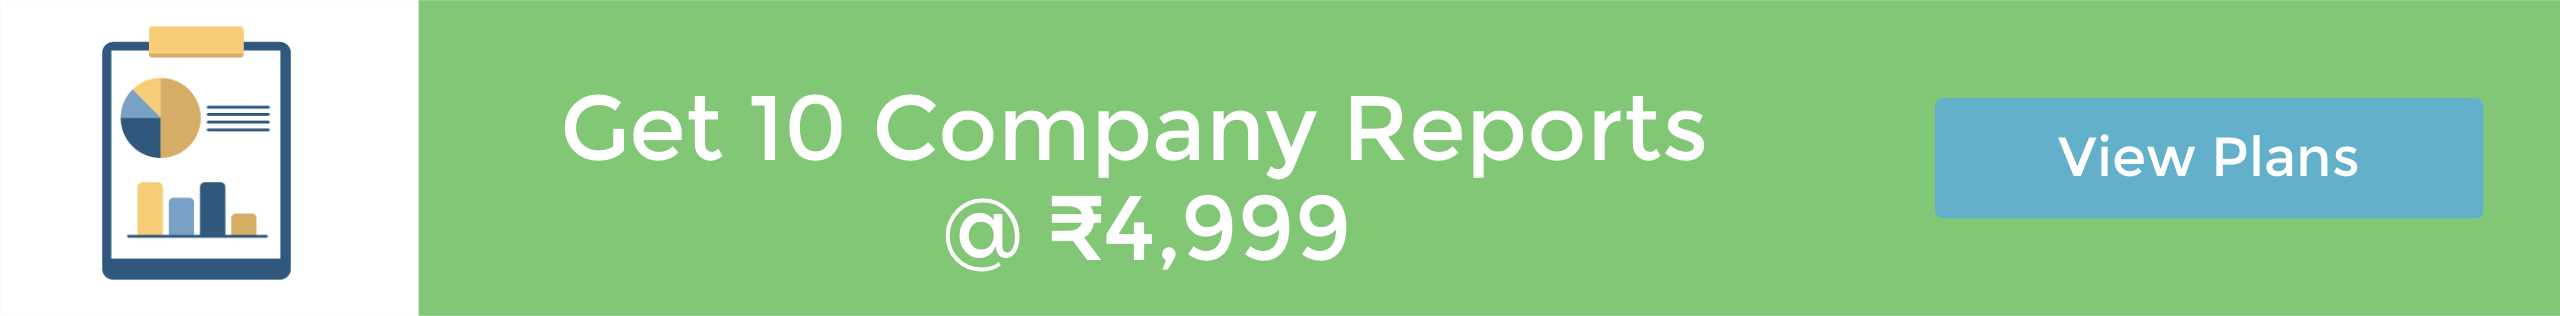 Get 10 Company Reports in ₹4,999